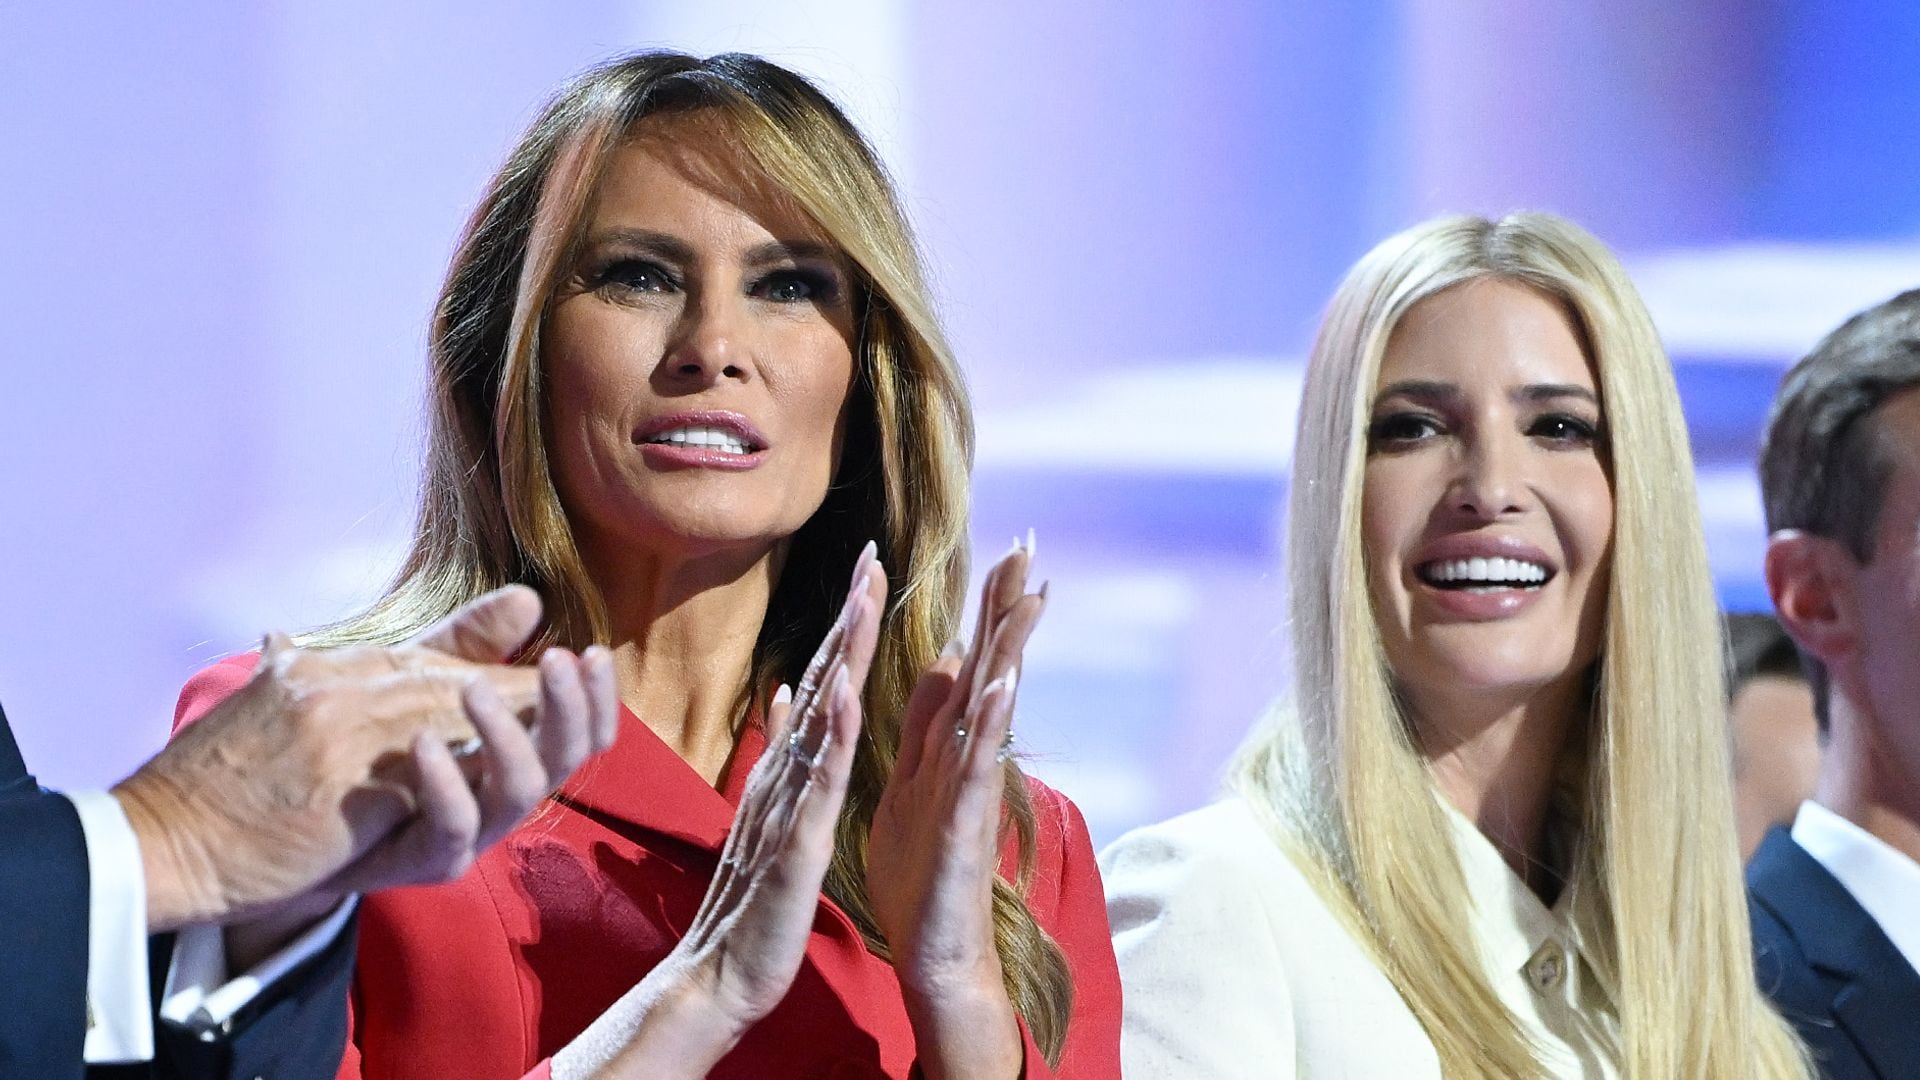 Melania and Ivanka Trump take the stage at the RNC showing support for Donald Trump [PHOTOS]